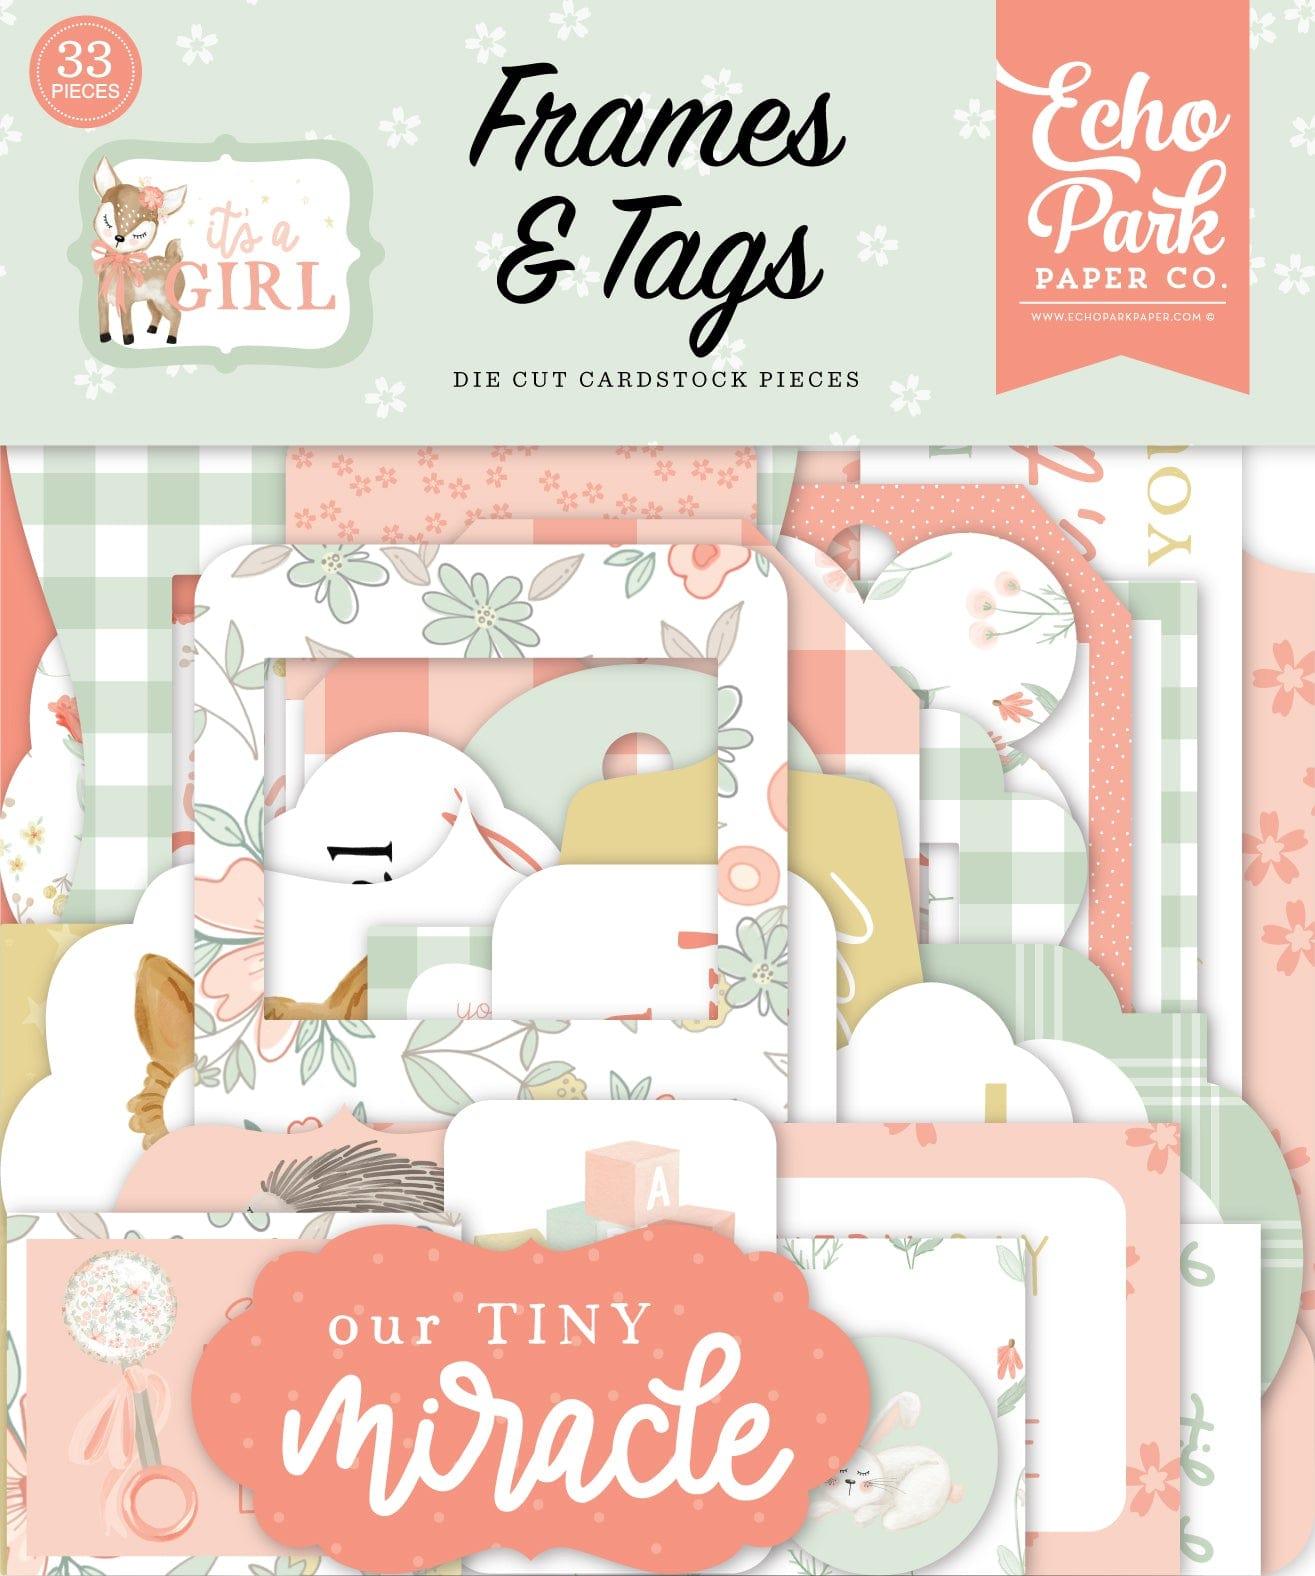 It's A Girl Collection 5 x 5 Scrapbook Tags & Frames Die Cuts by Echo Park Paper - Scrapbook Supply Companies